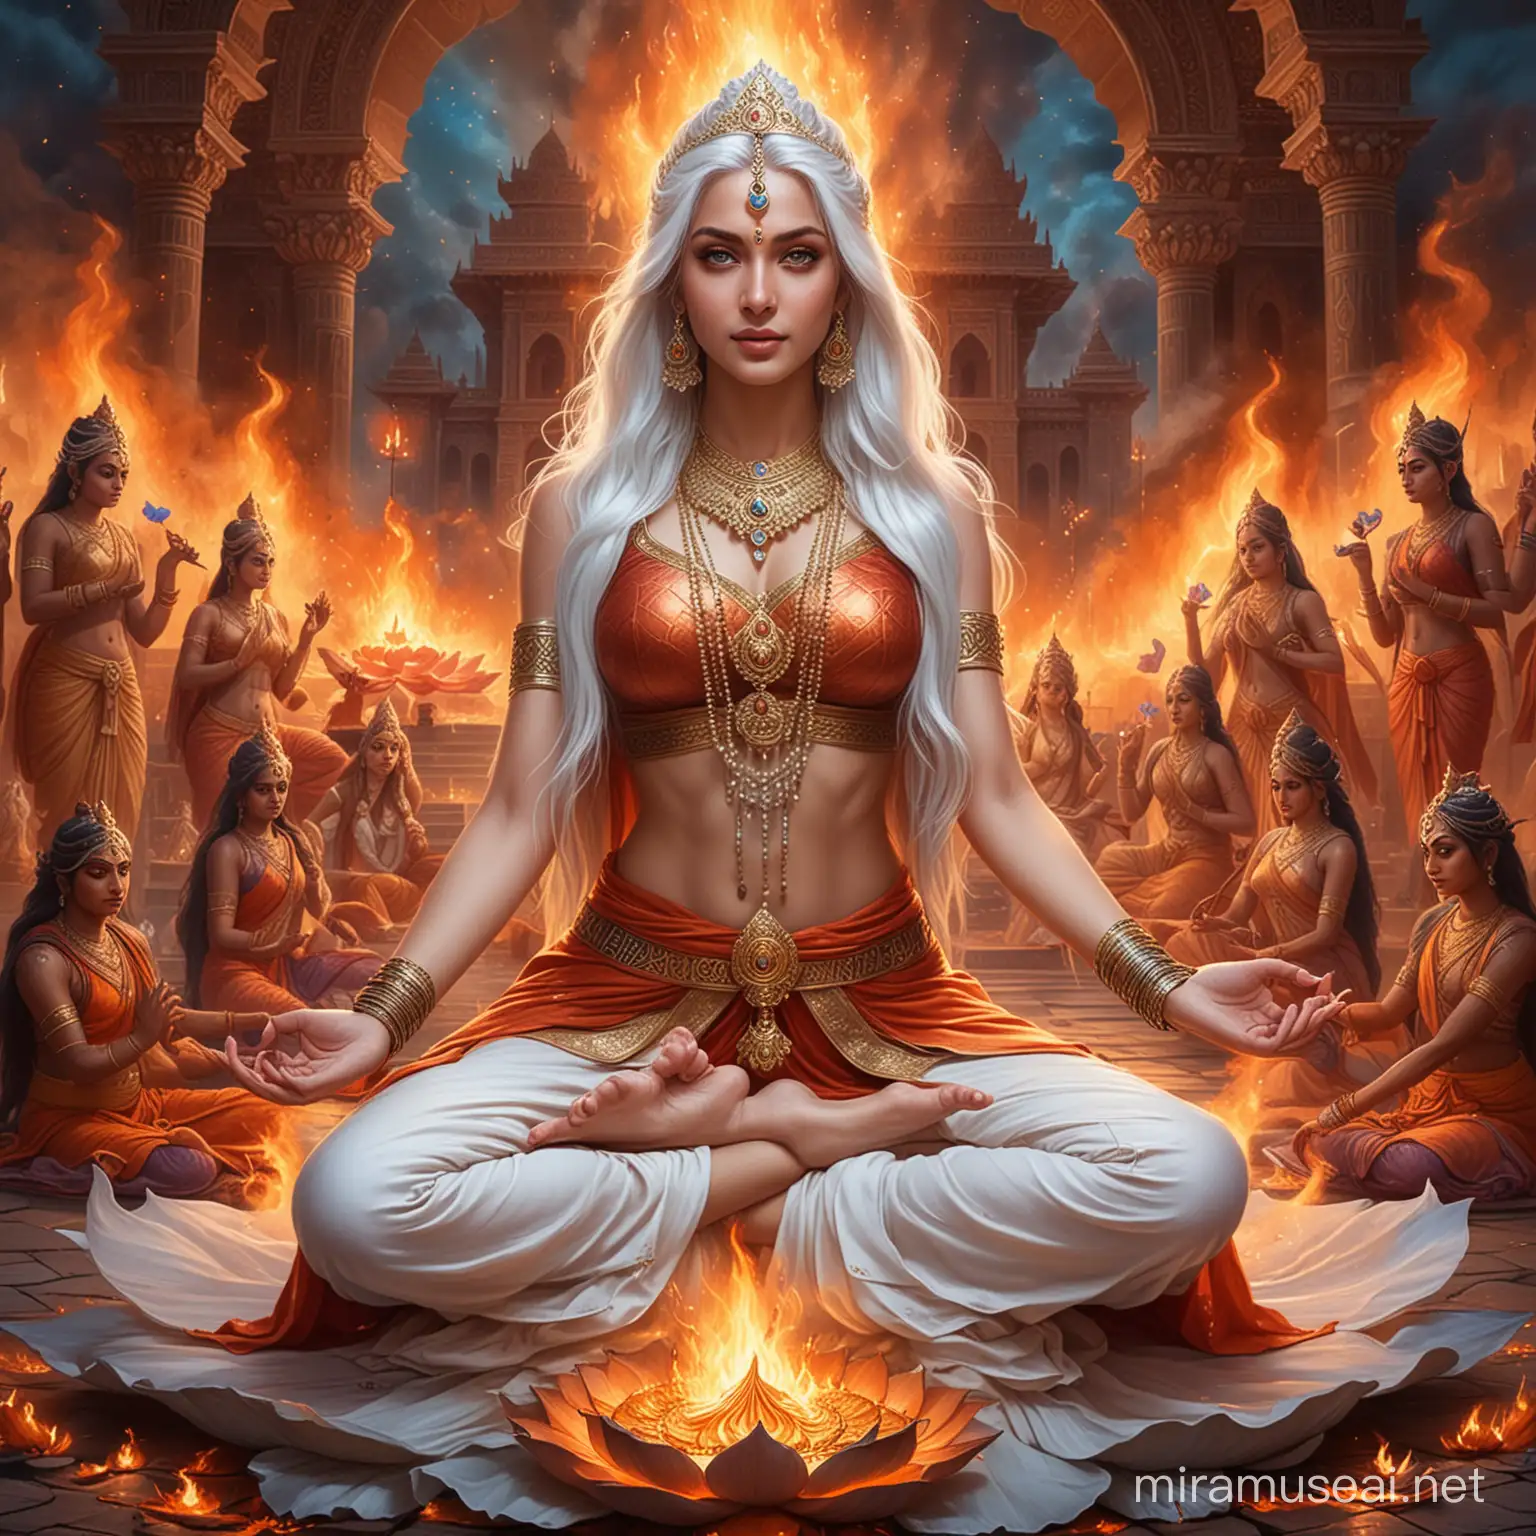 Powerful Hindu Empress Surrounded by Deities and Fire